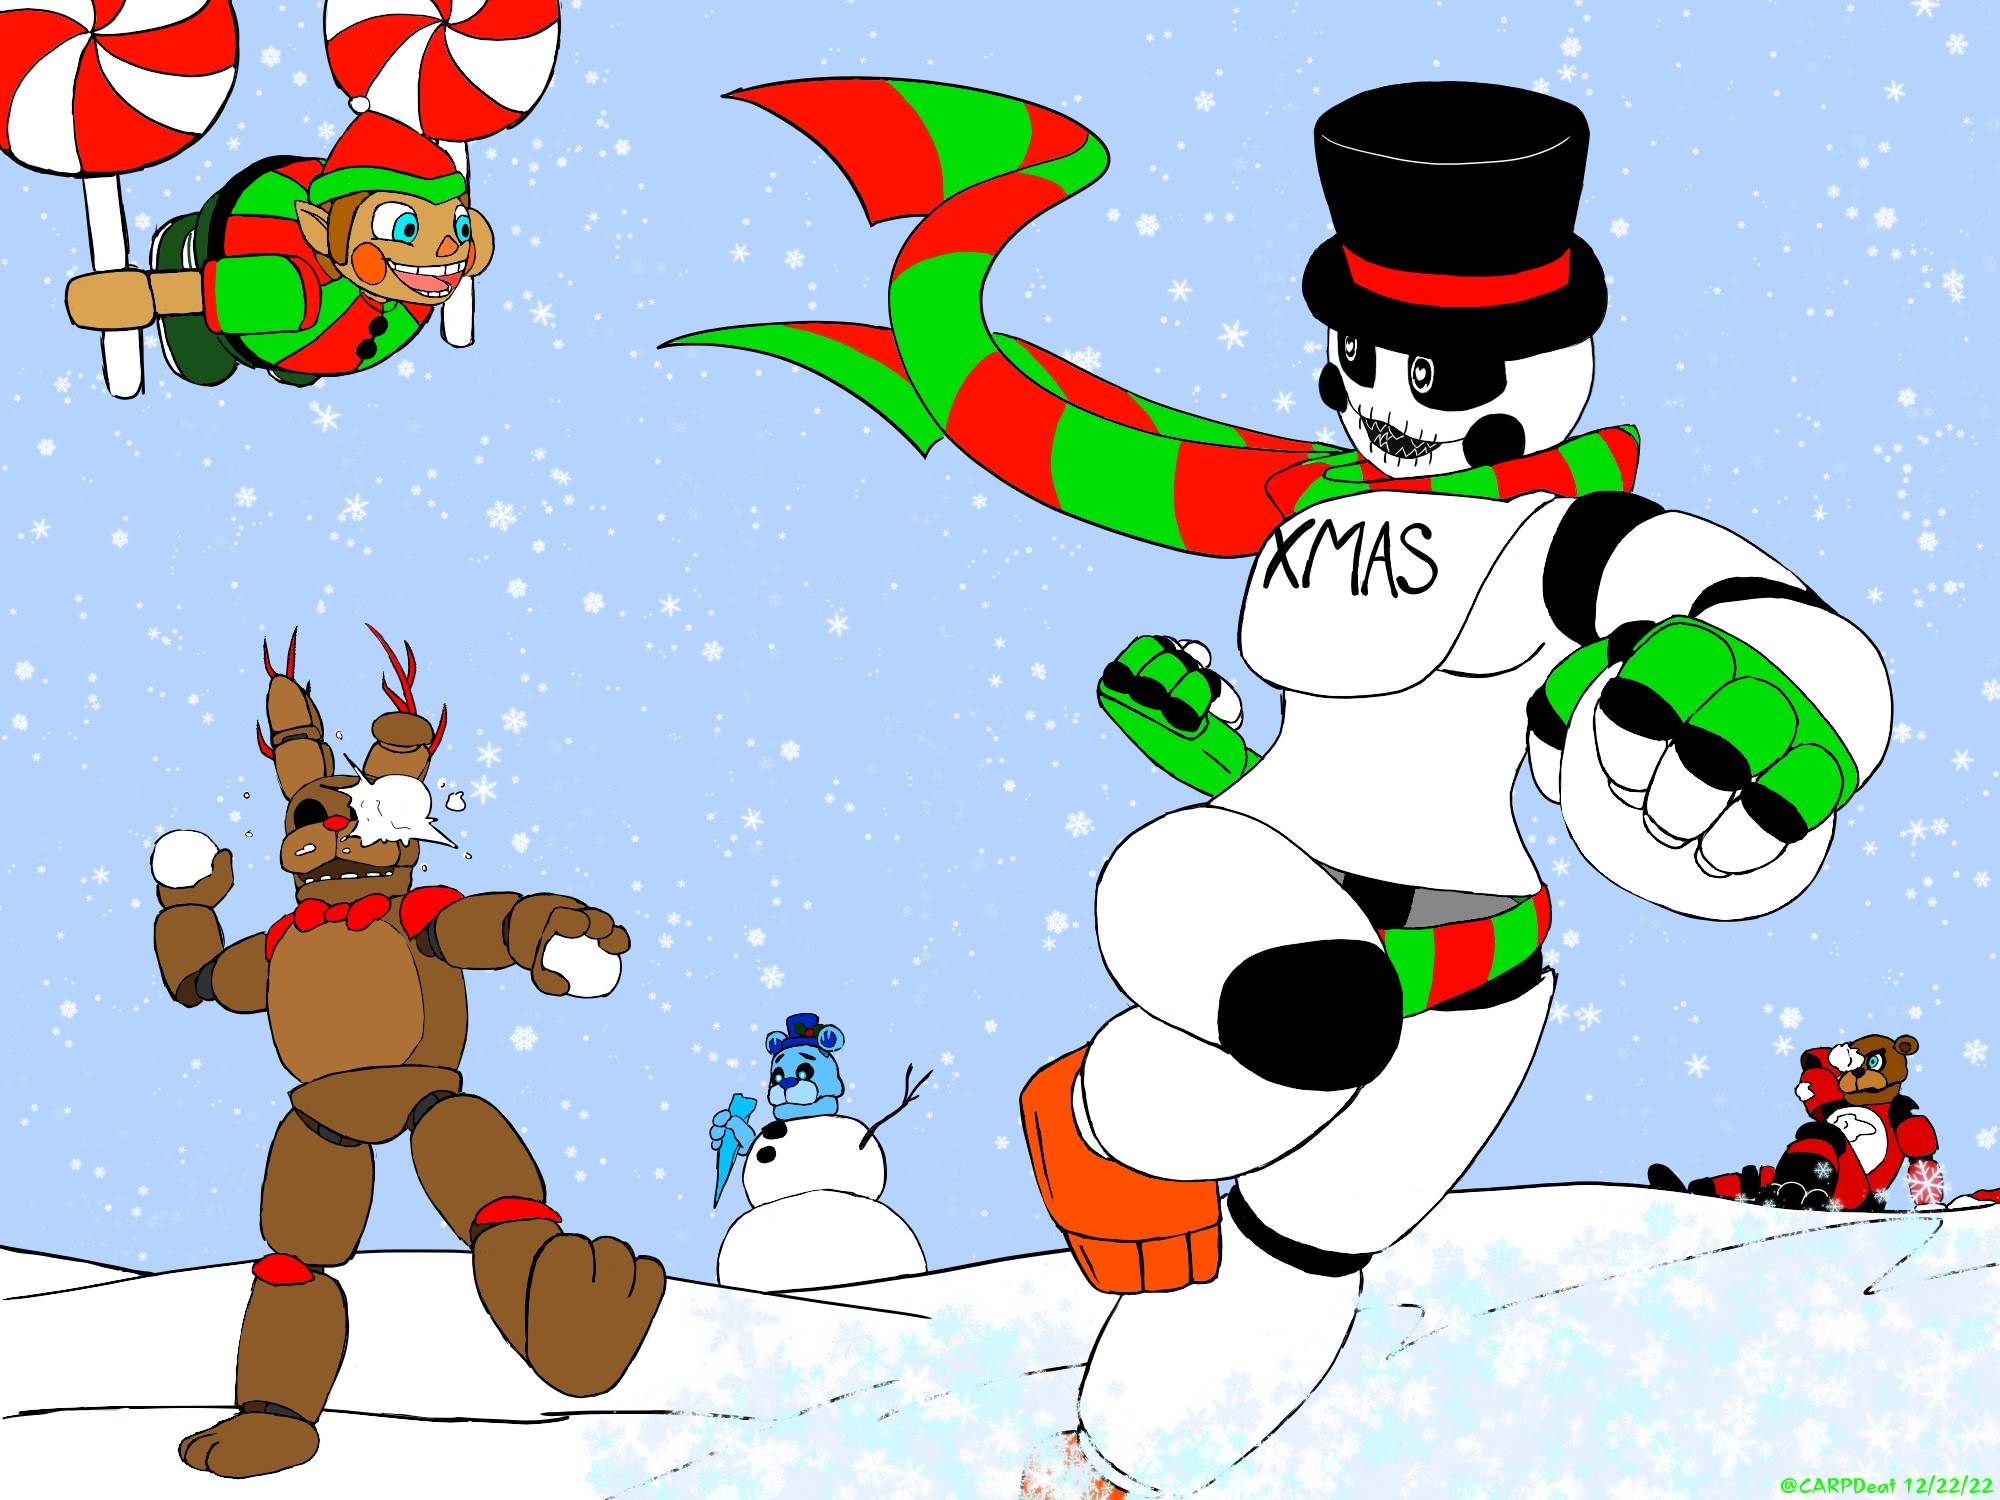 Everything FNaF!!🎄❄️ on X: Sorry for being late to this. The